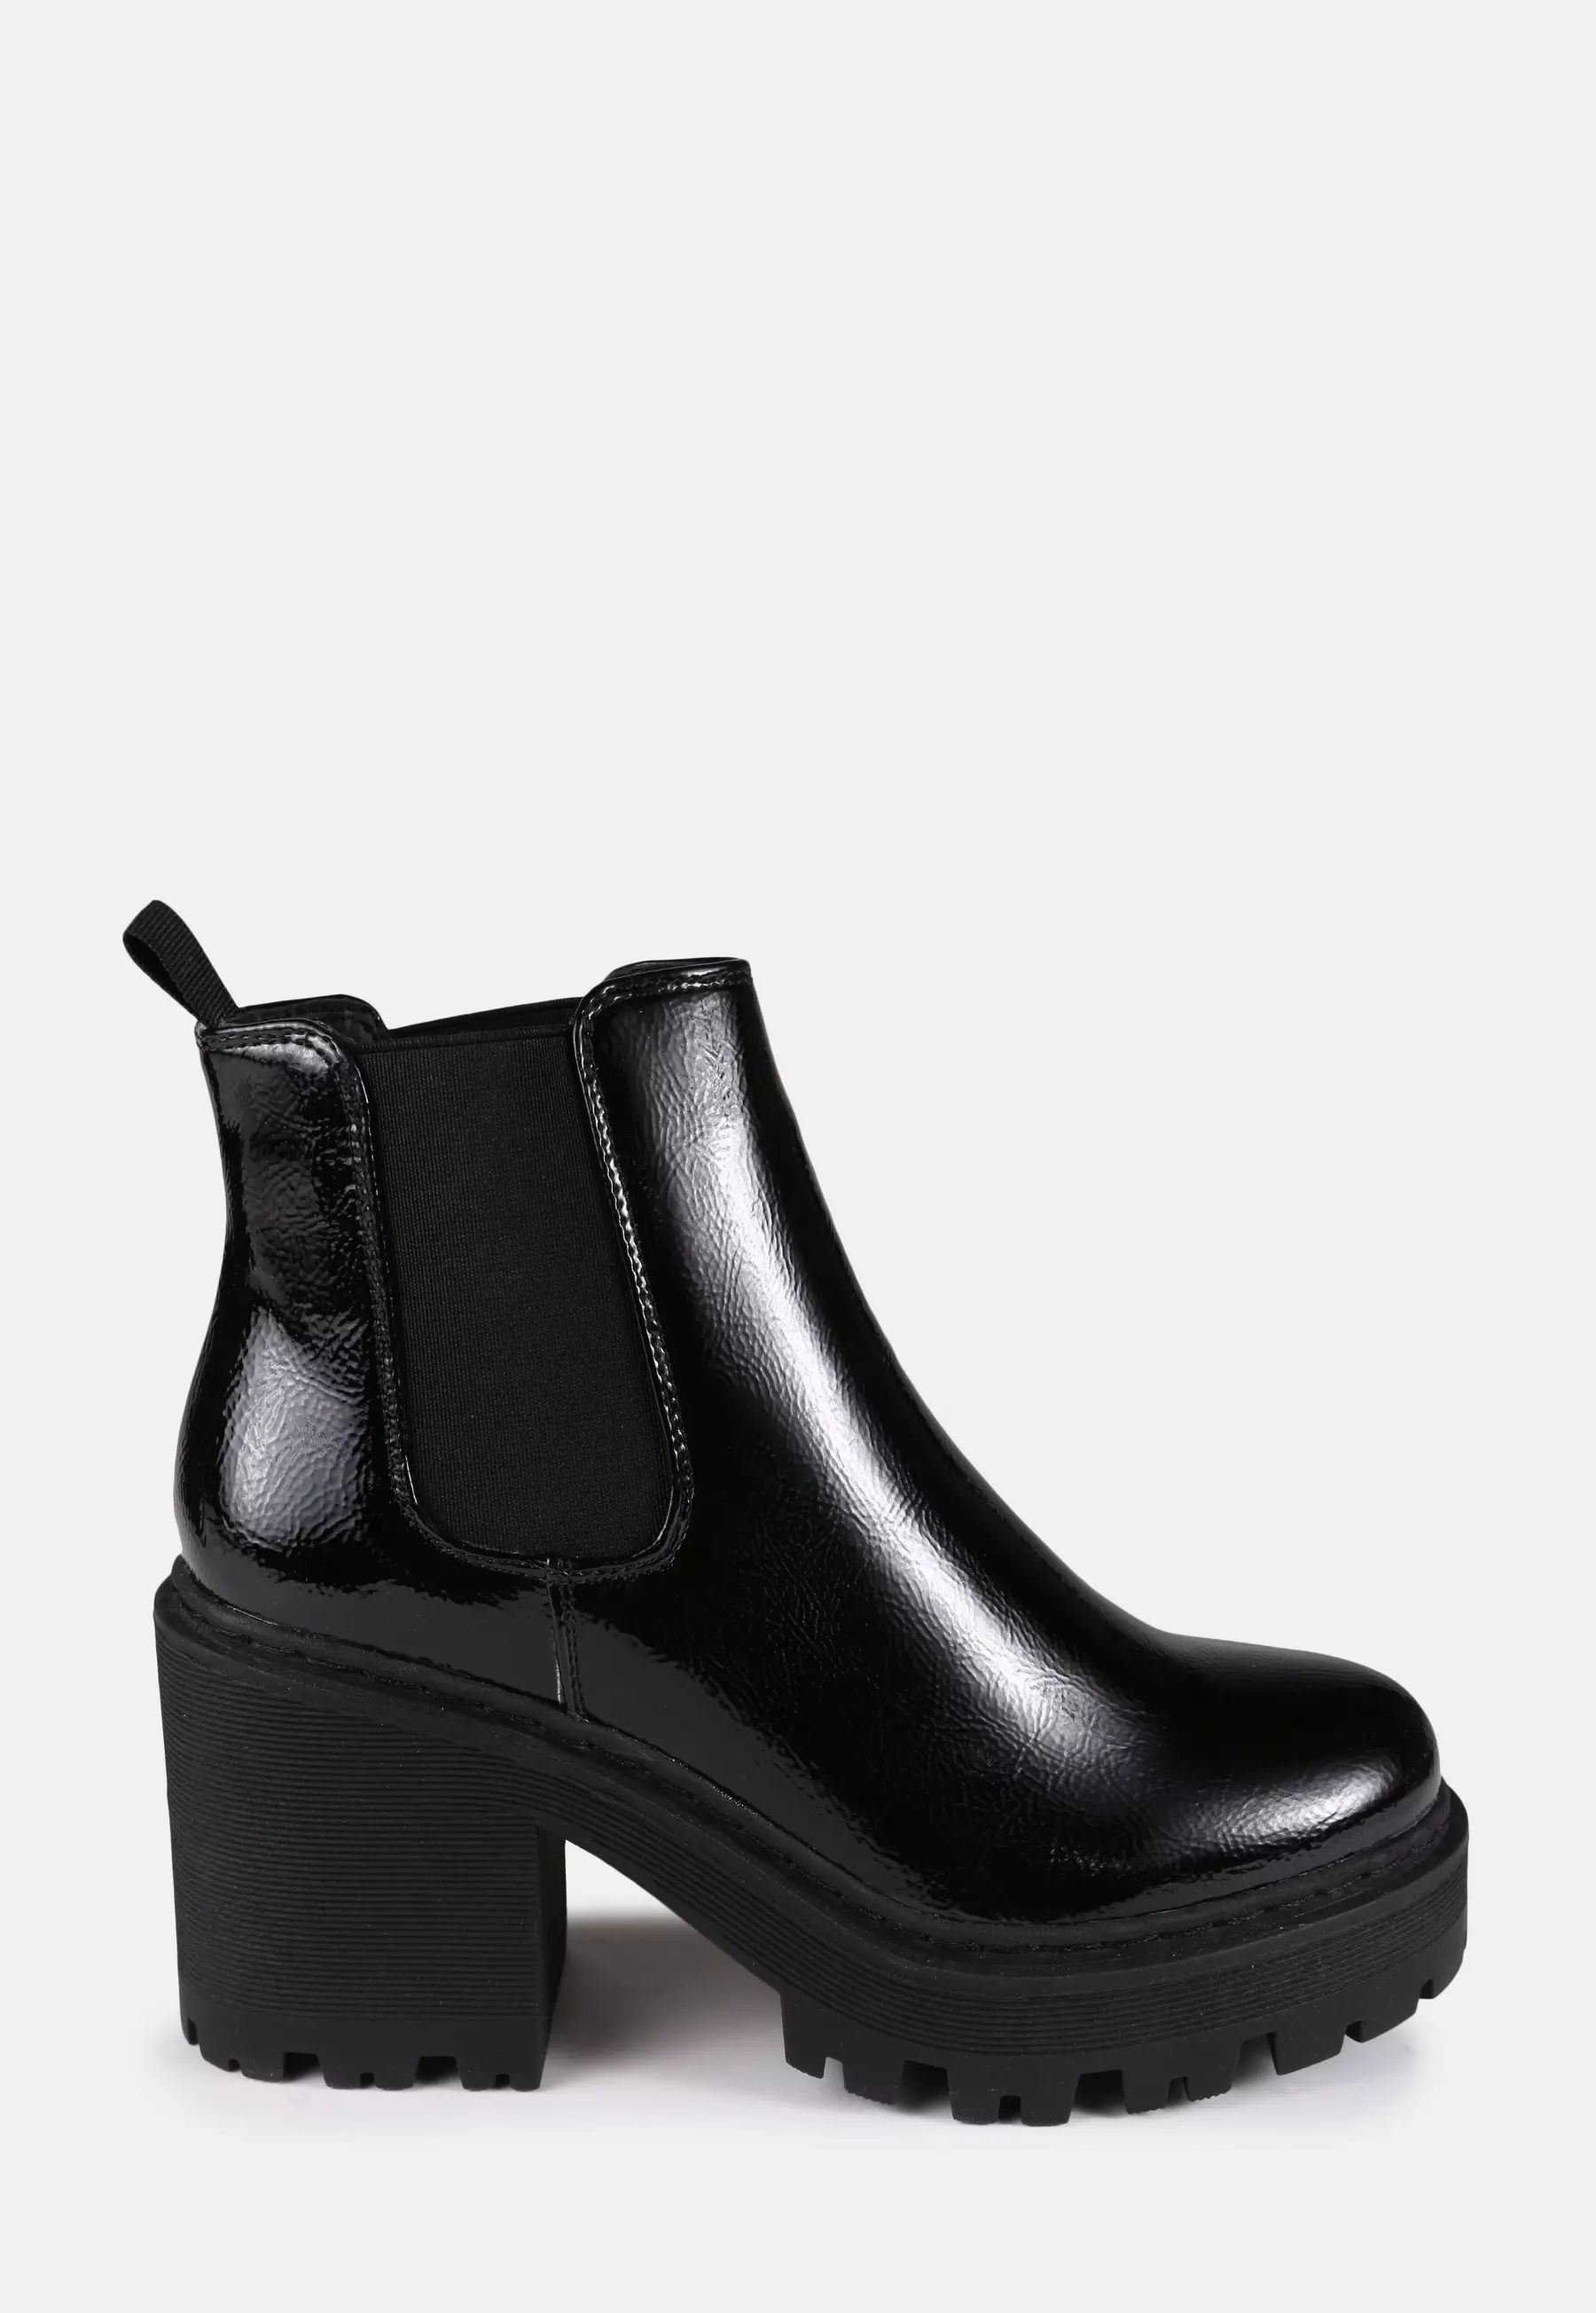 Missguided - Black Patent Cleated Sole Chelsea Boots | Missguided (US & CA)